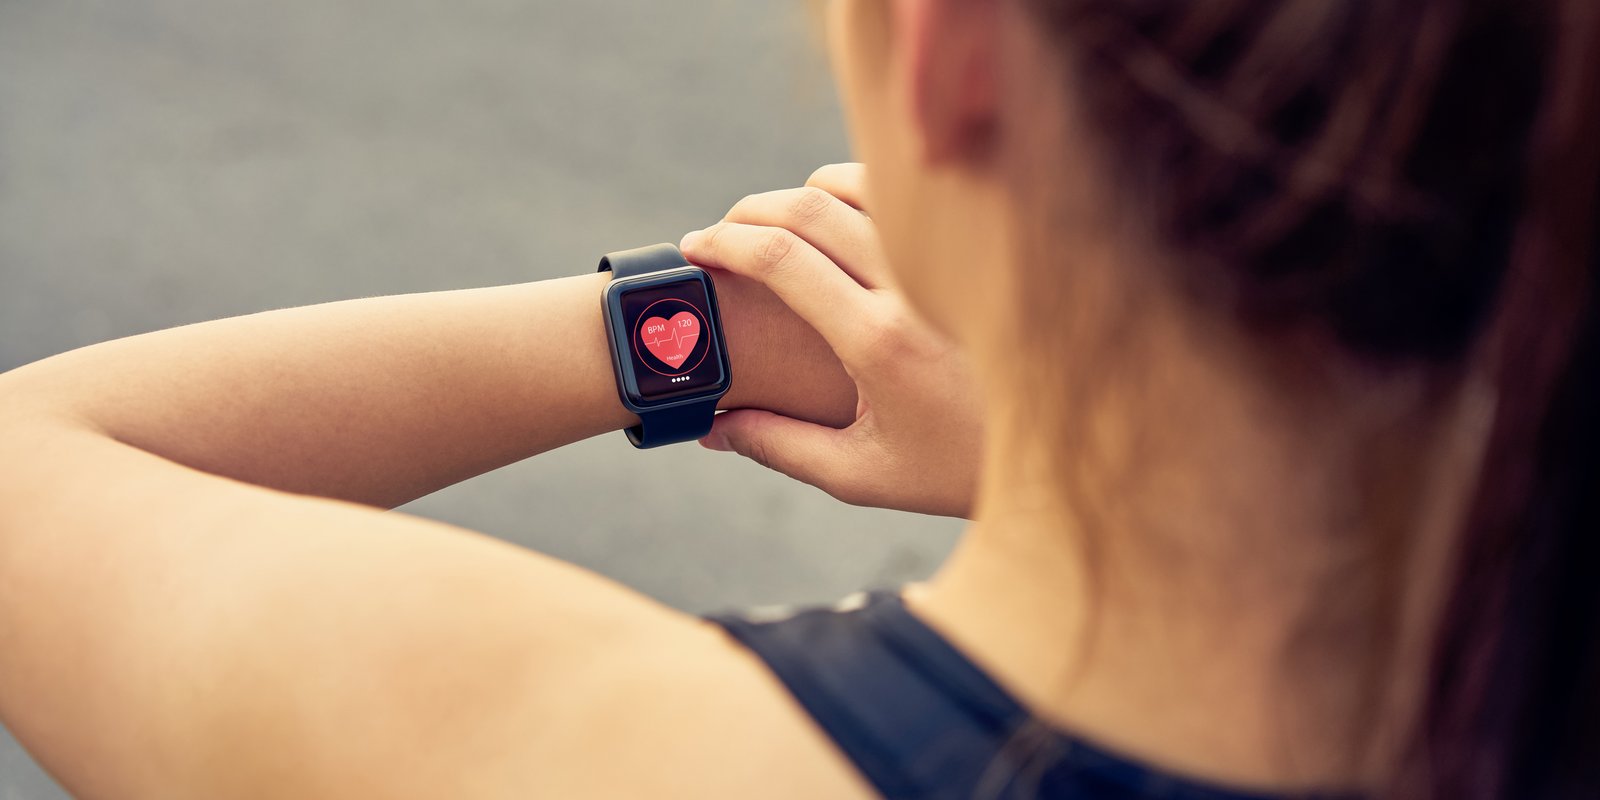 A lady with a smart watch checking her heart rate